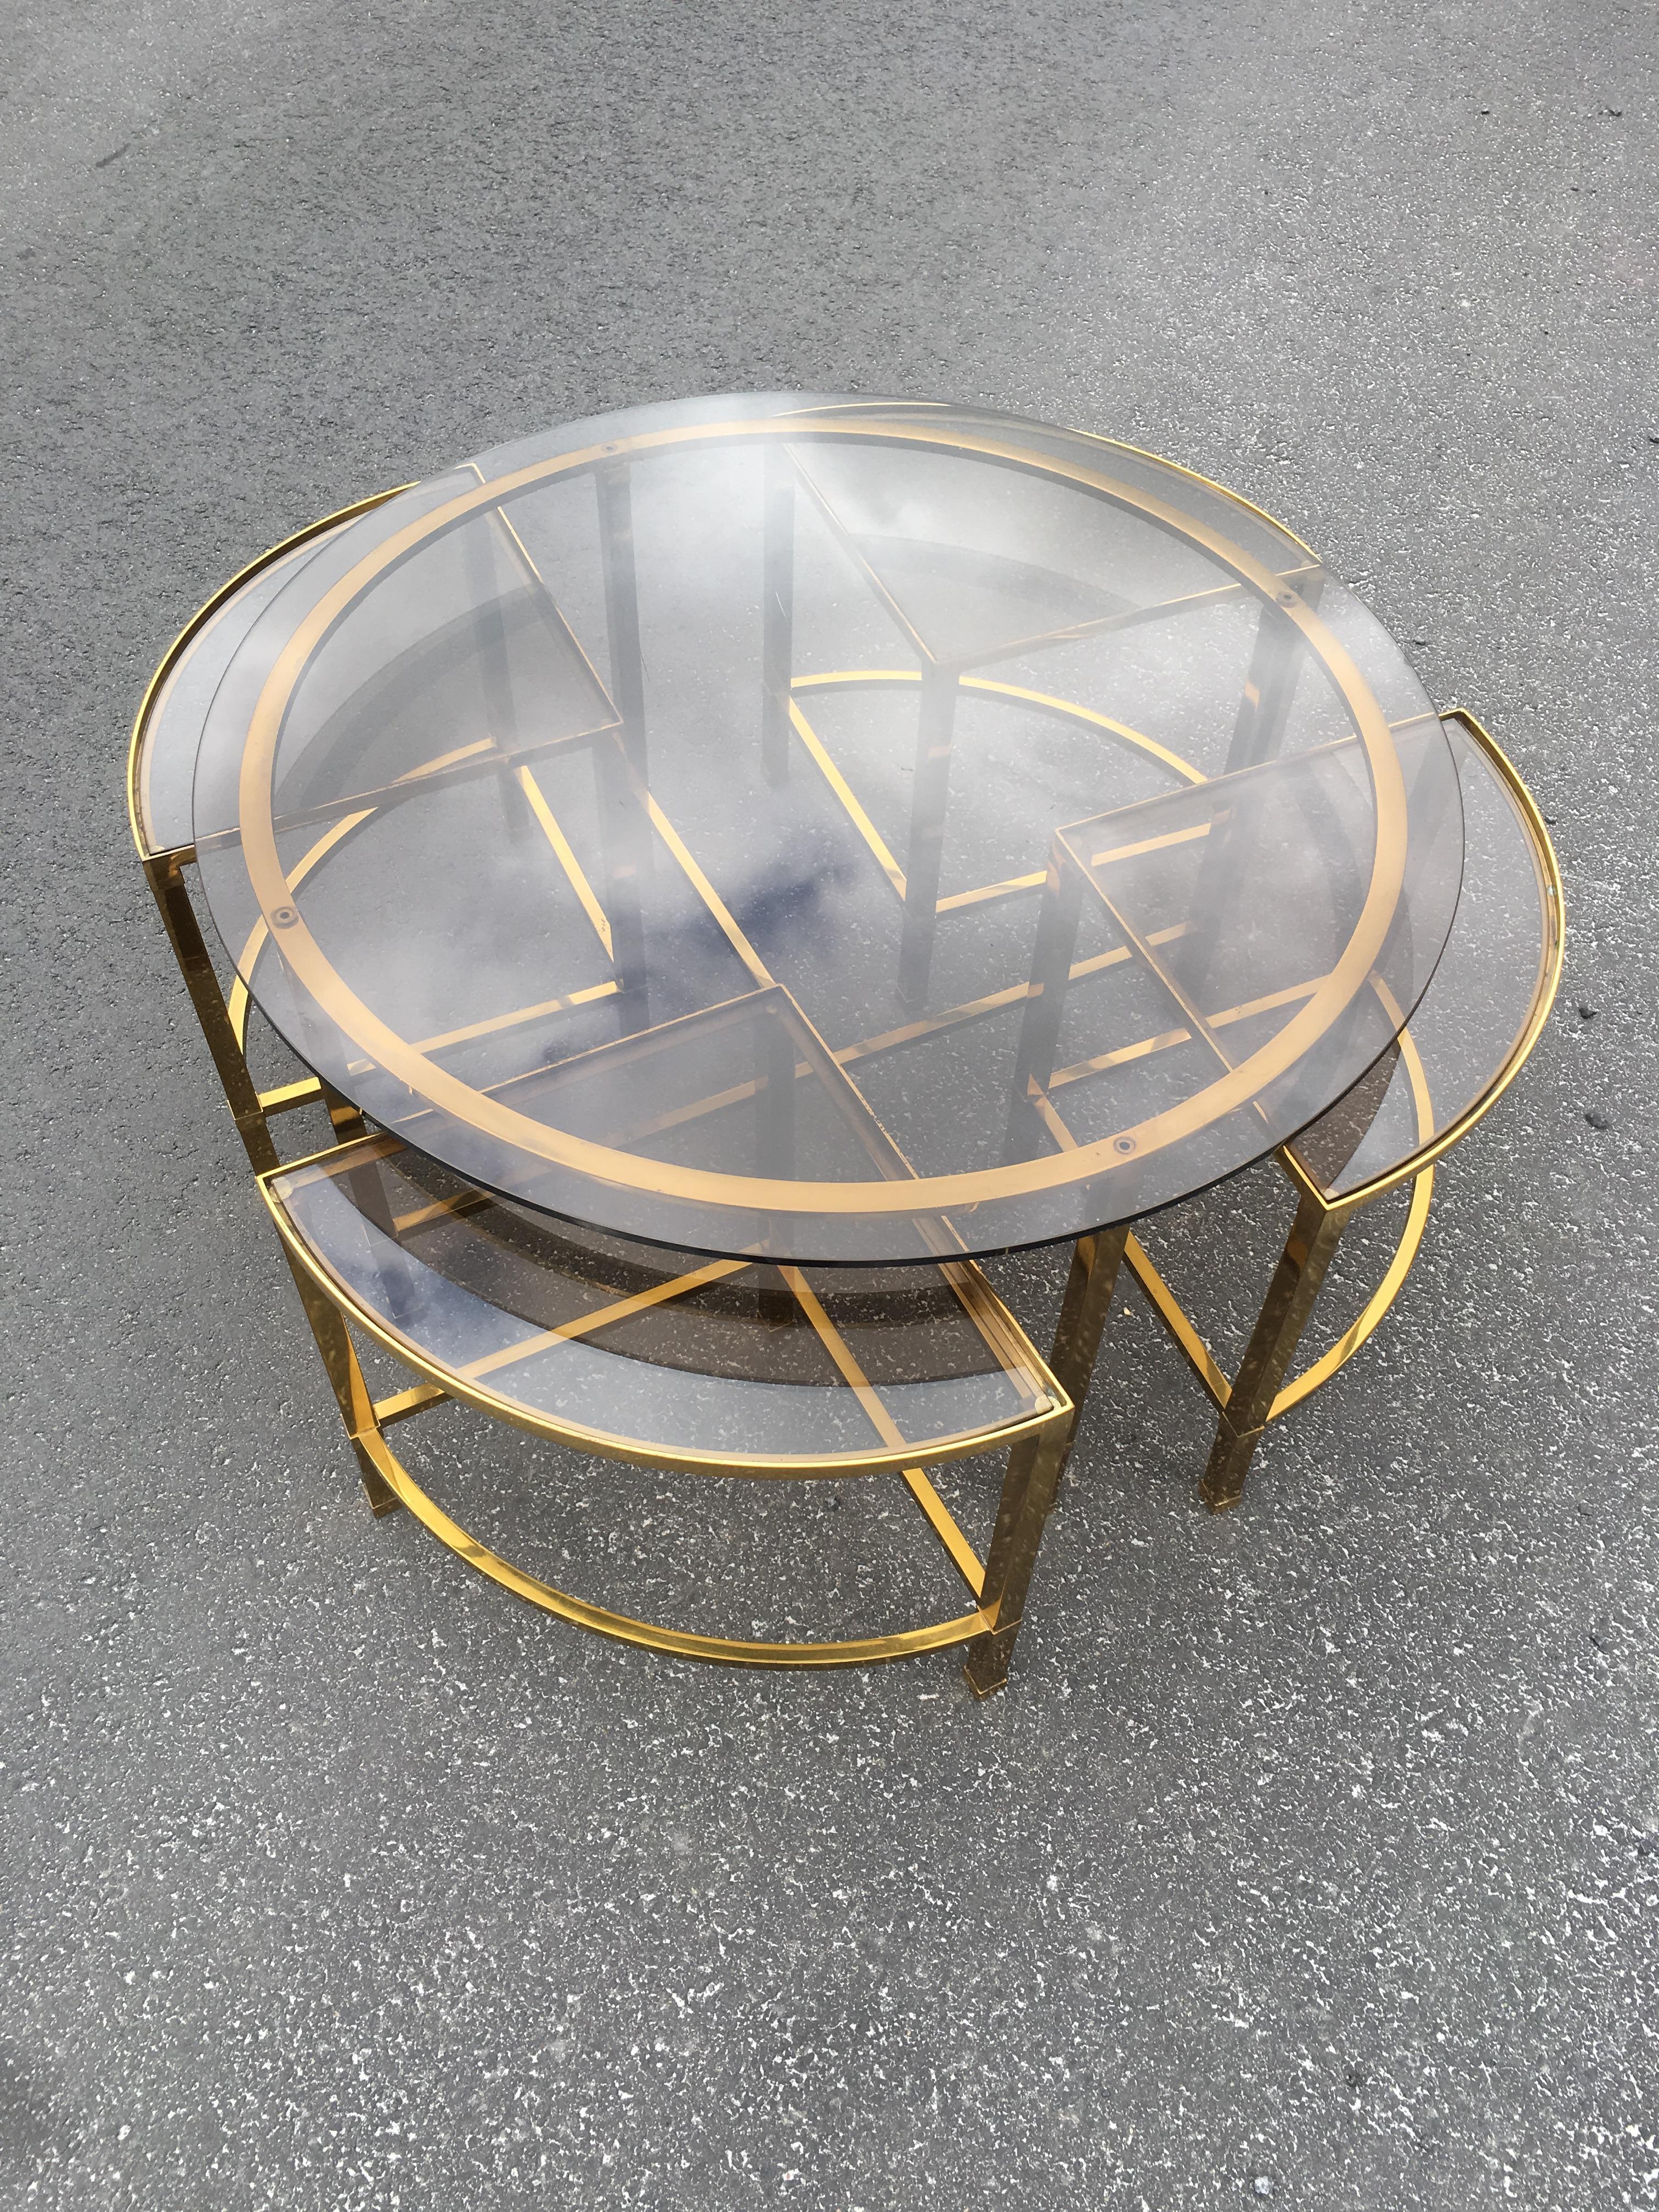 Coffee table and its 4 extra shelves in brass and glass smoked Maison Baguès style
metal and glass in very good condition